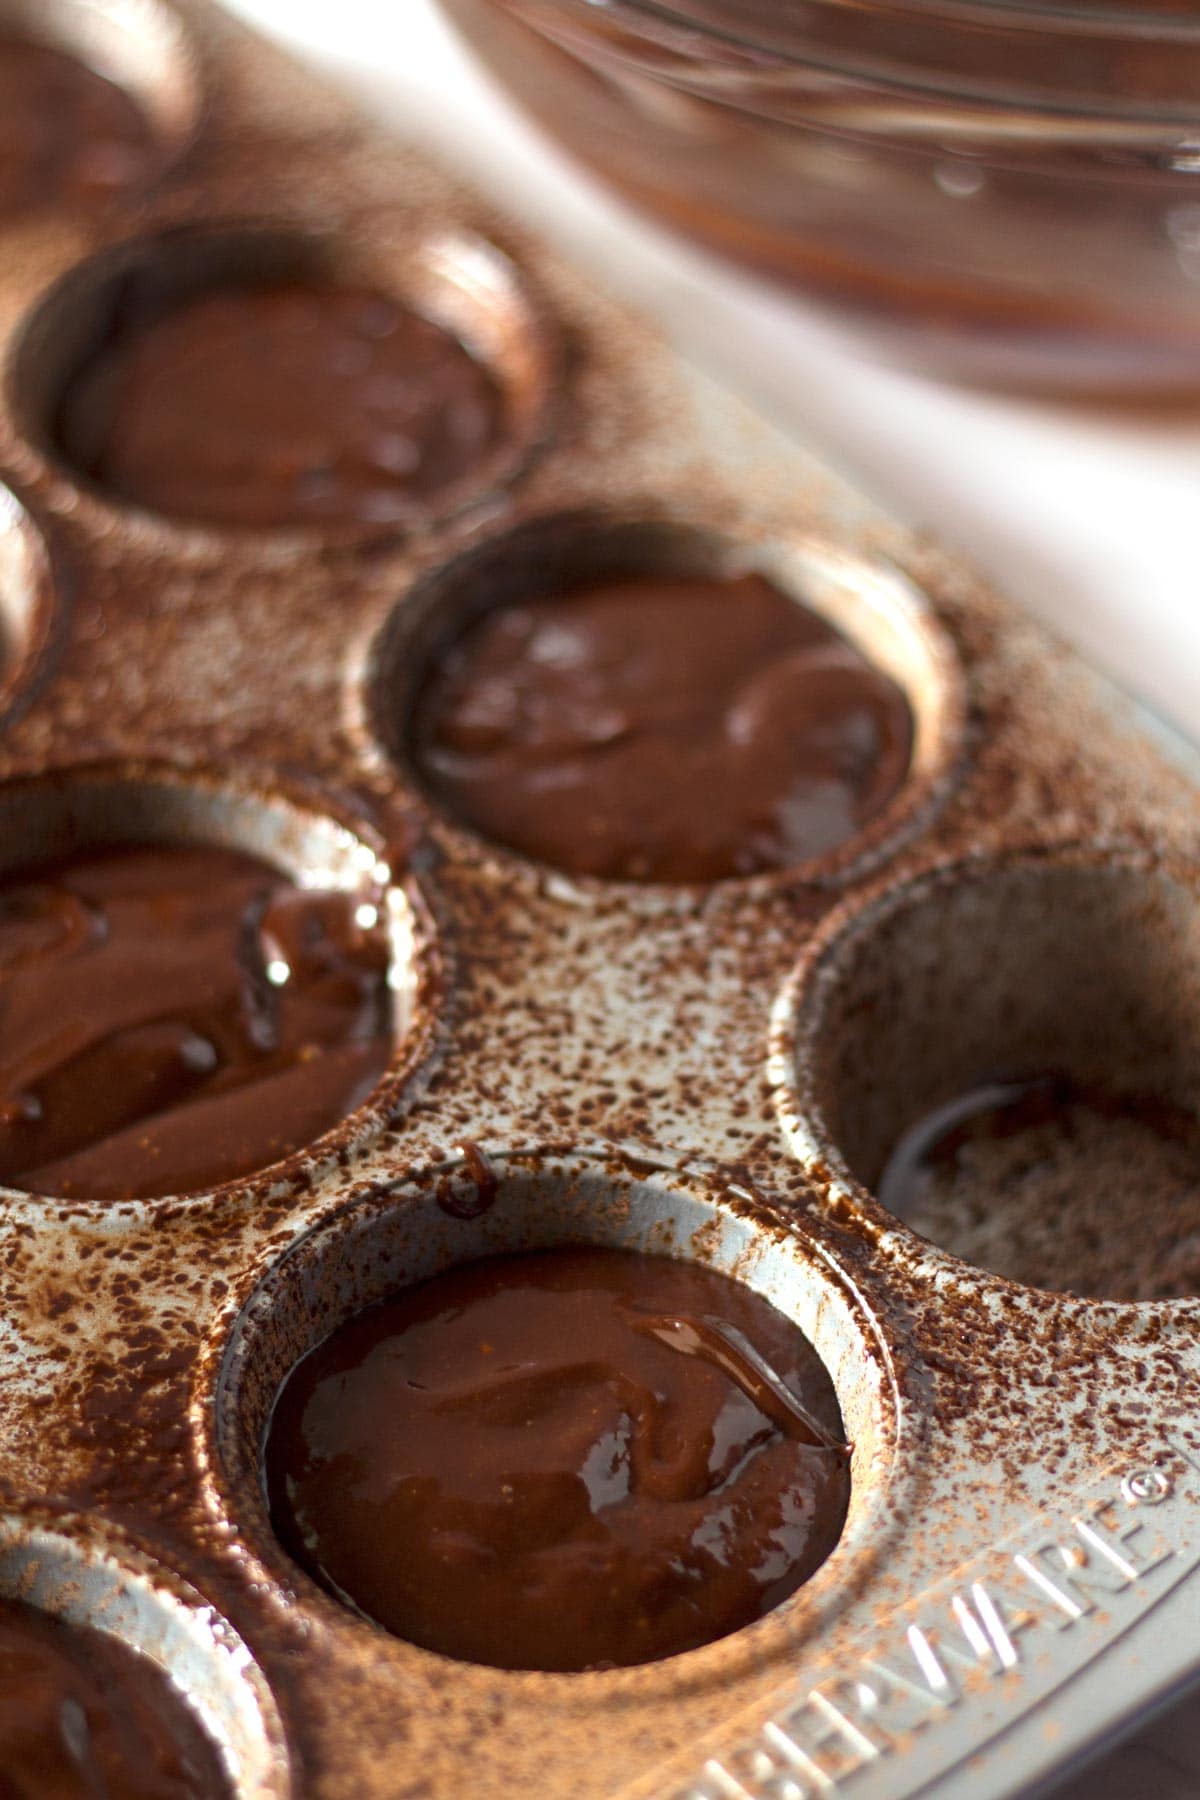 Muffin tin filled three-fourths of the way with lava cake batter.